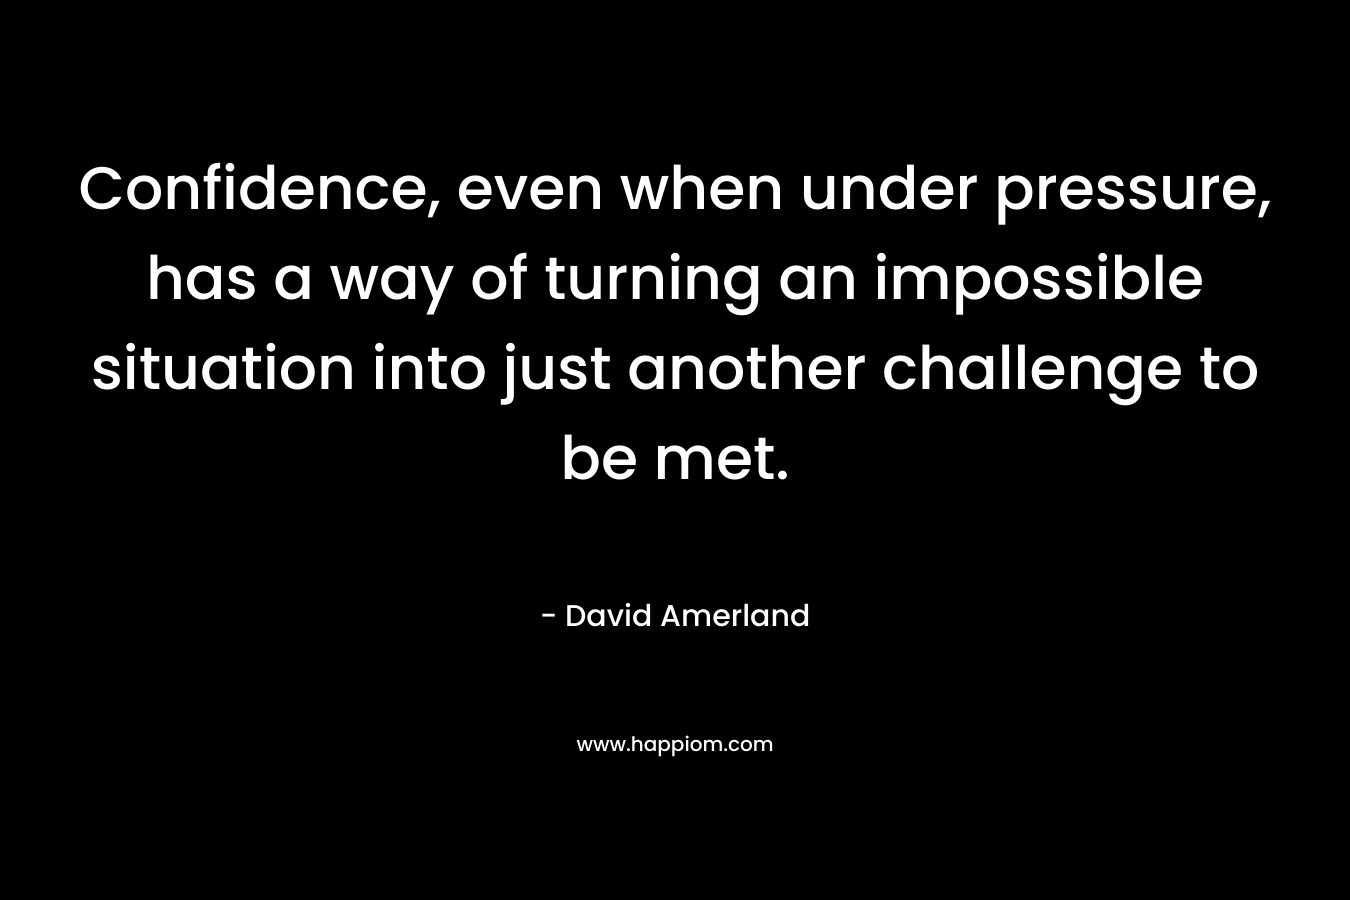 Confidence, even when under pressure, has a way of turning an impossible situation into just another challenge to be met. – David Amerland